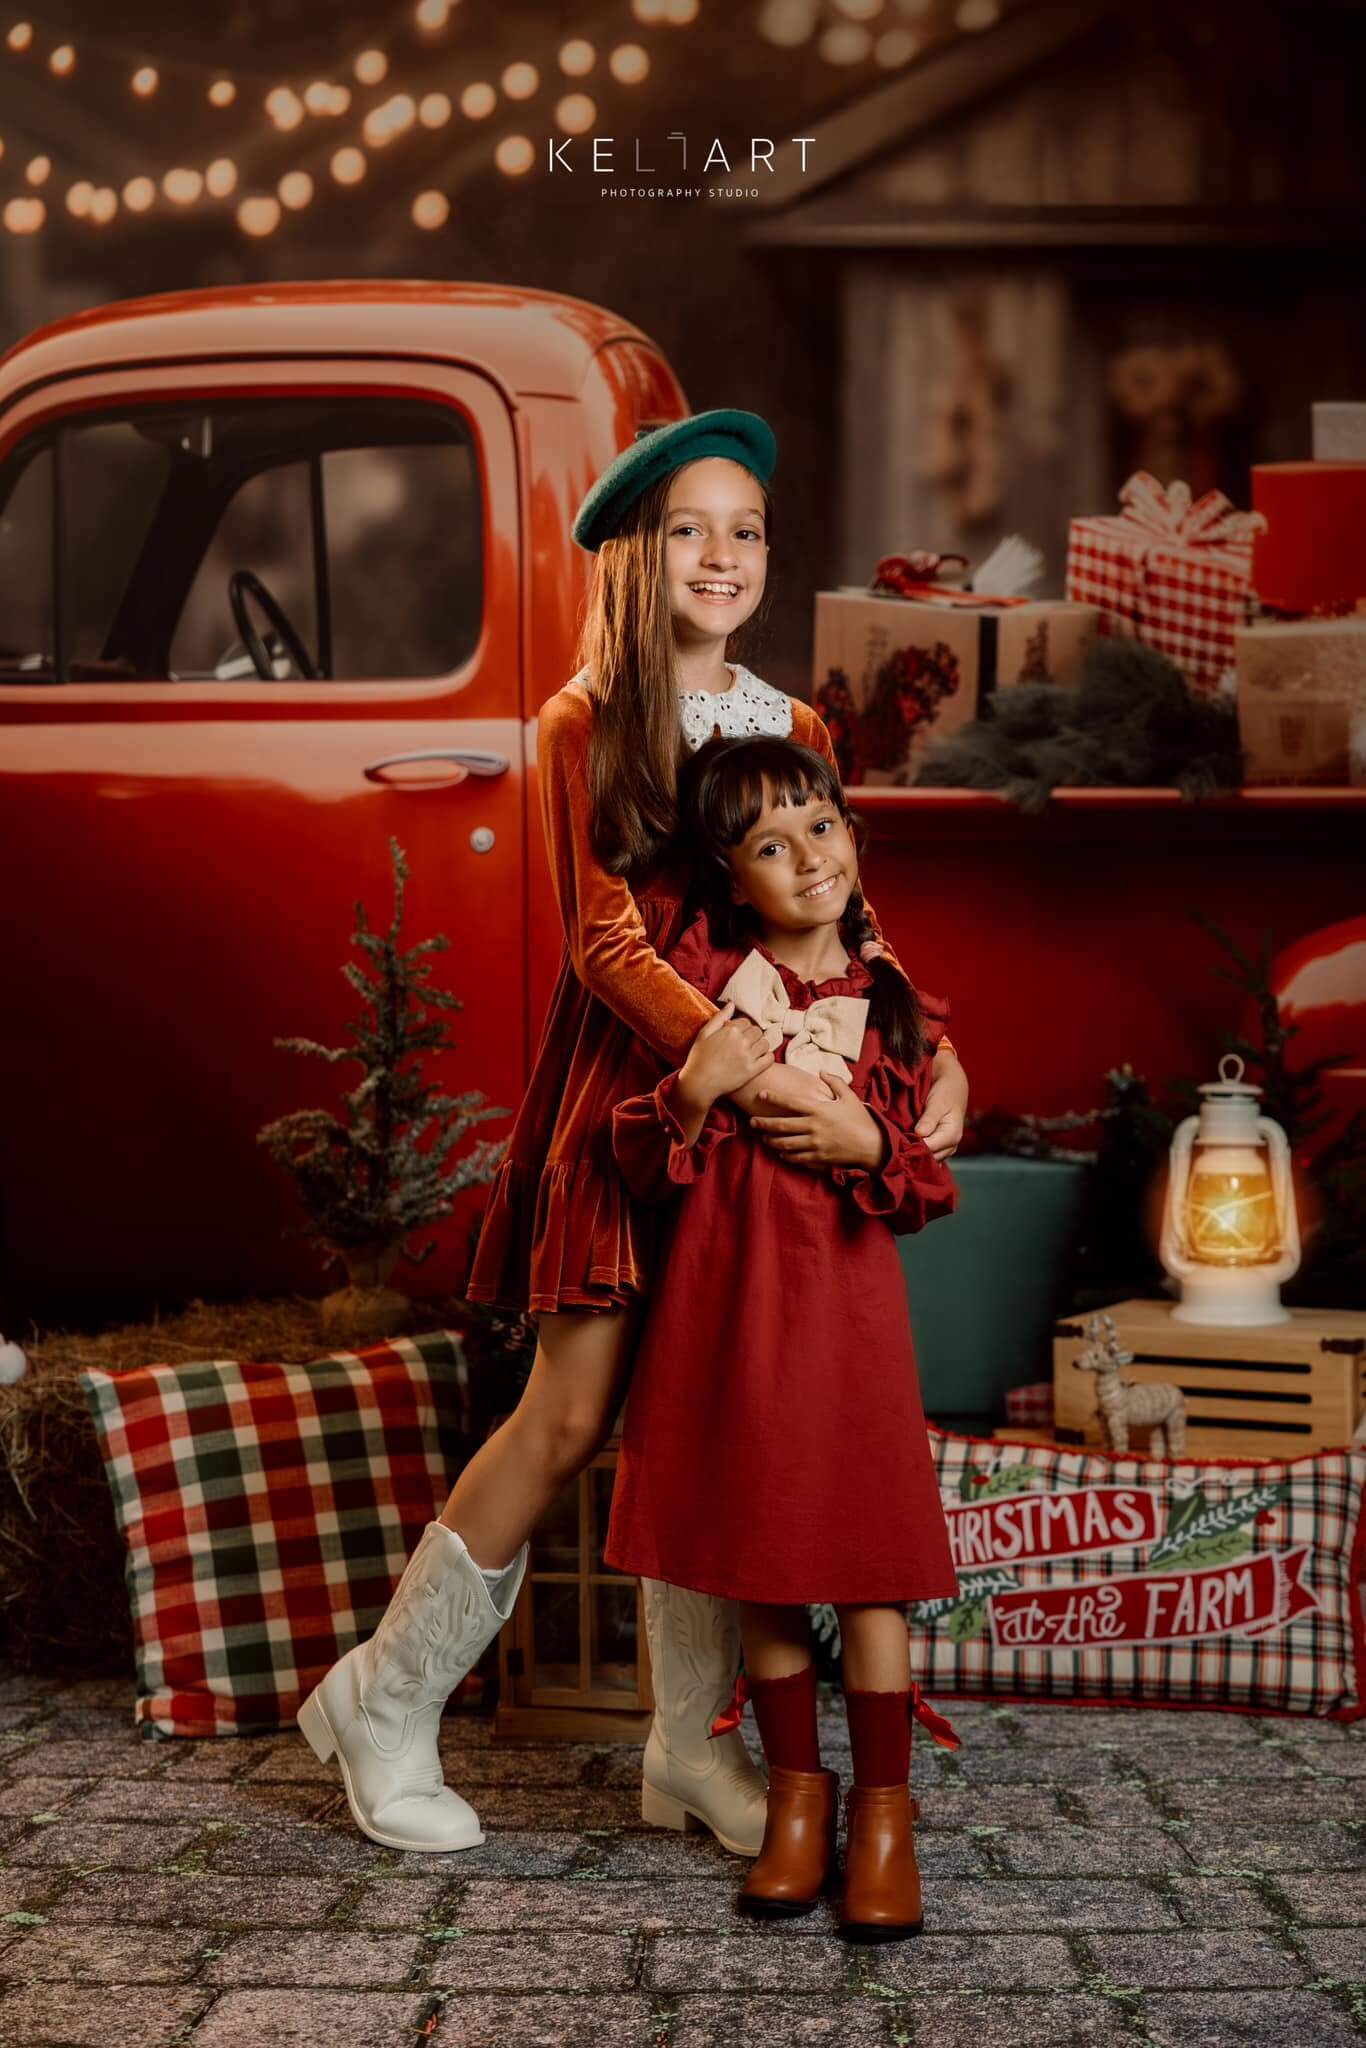 Kate Christmas Gift Red Truck Backdrop for Photography